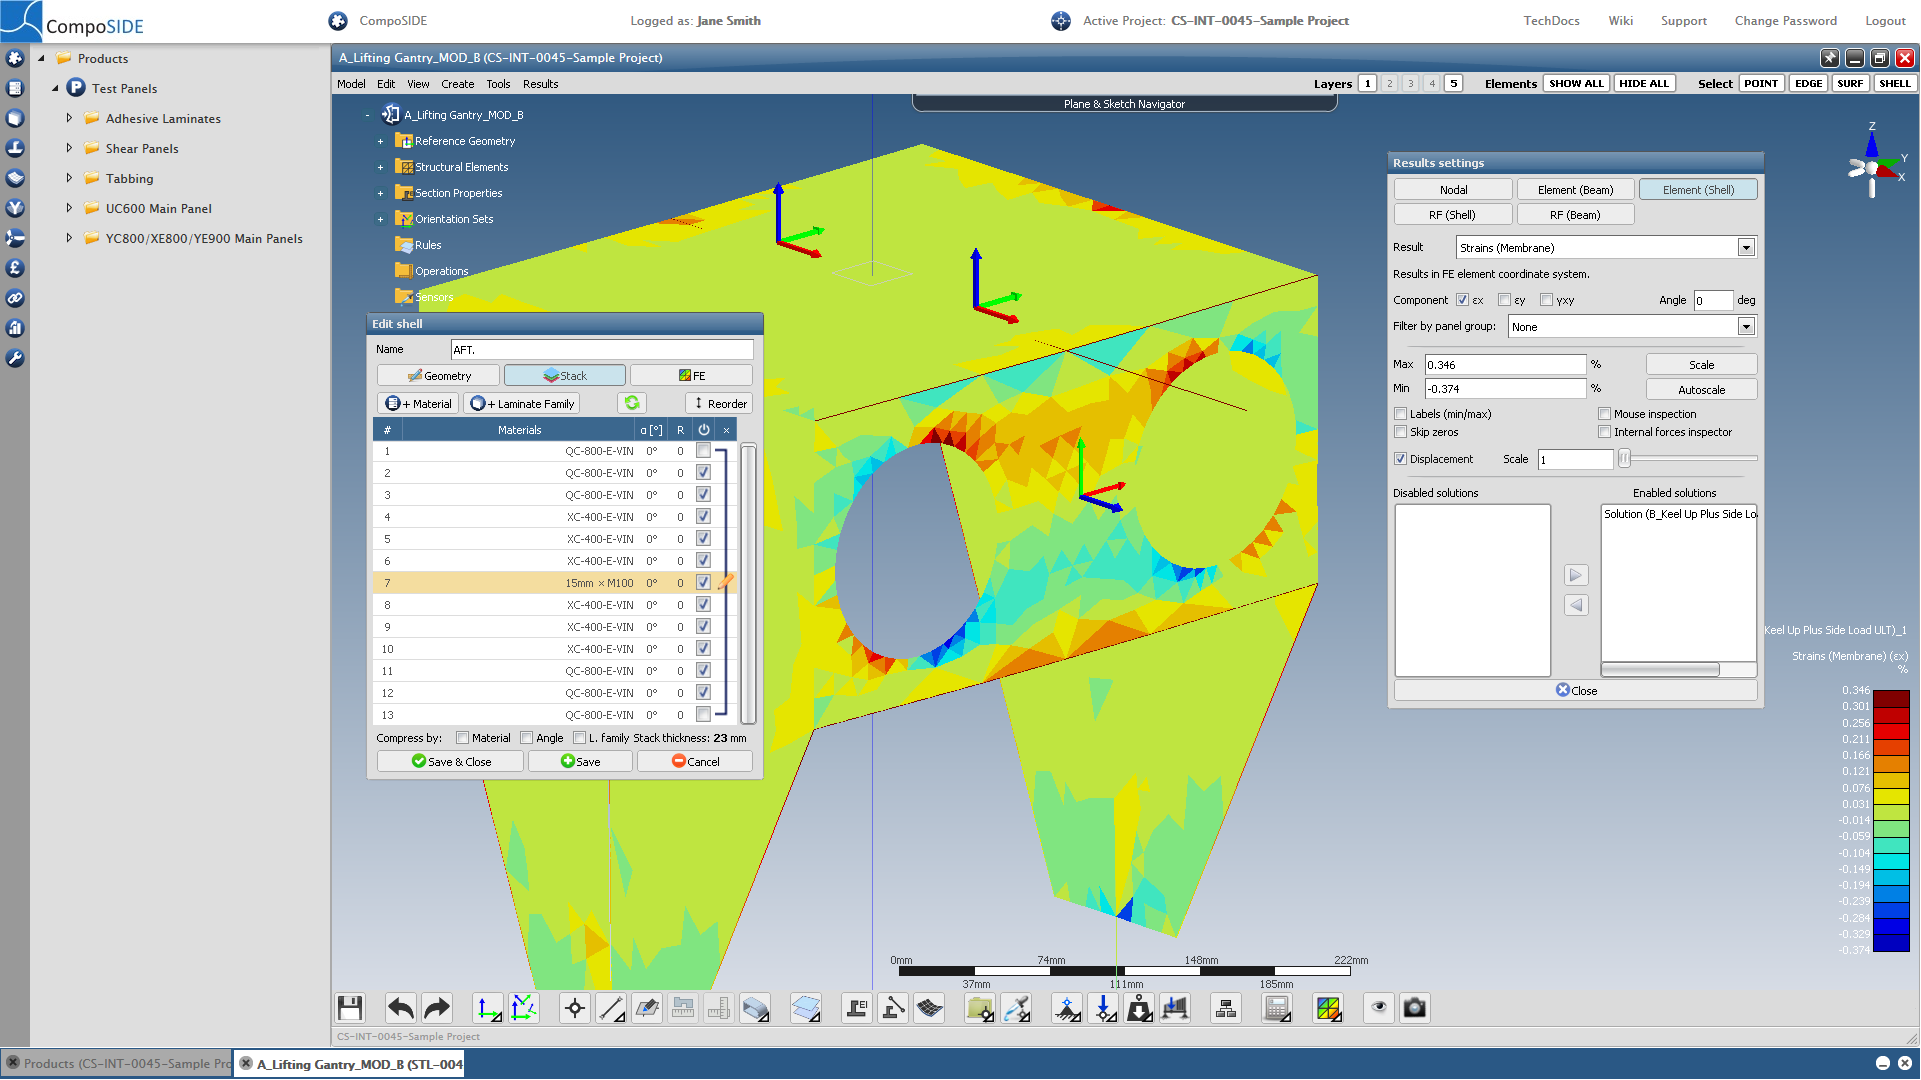 CompoSIDE Ltd provides an engineering simulation and data management platform for composite design and analysis software.